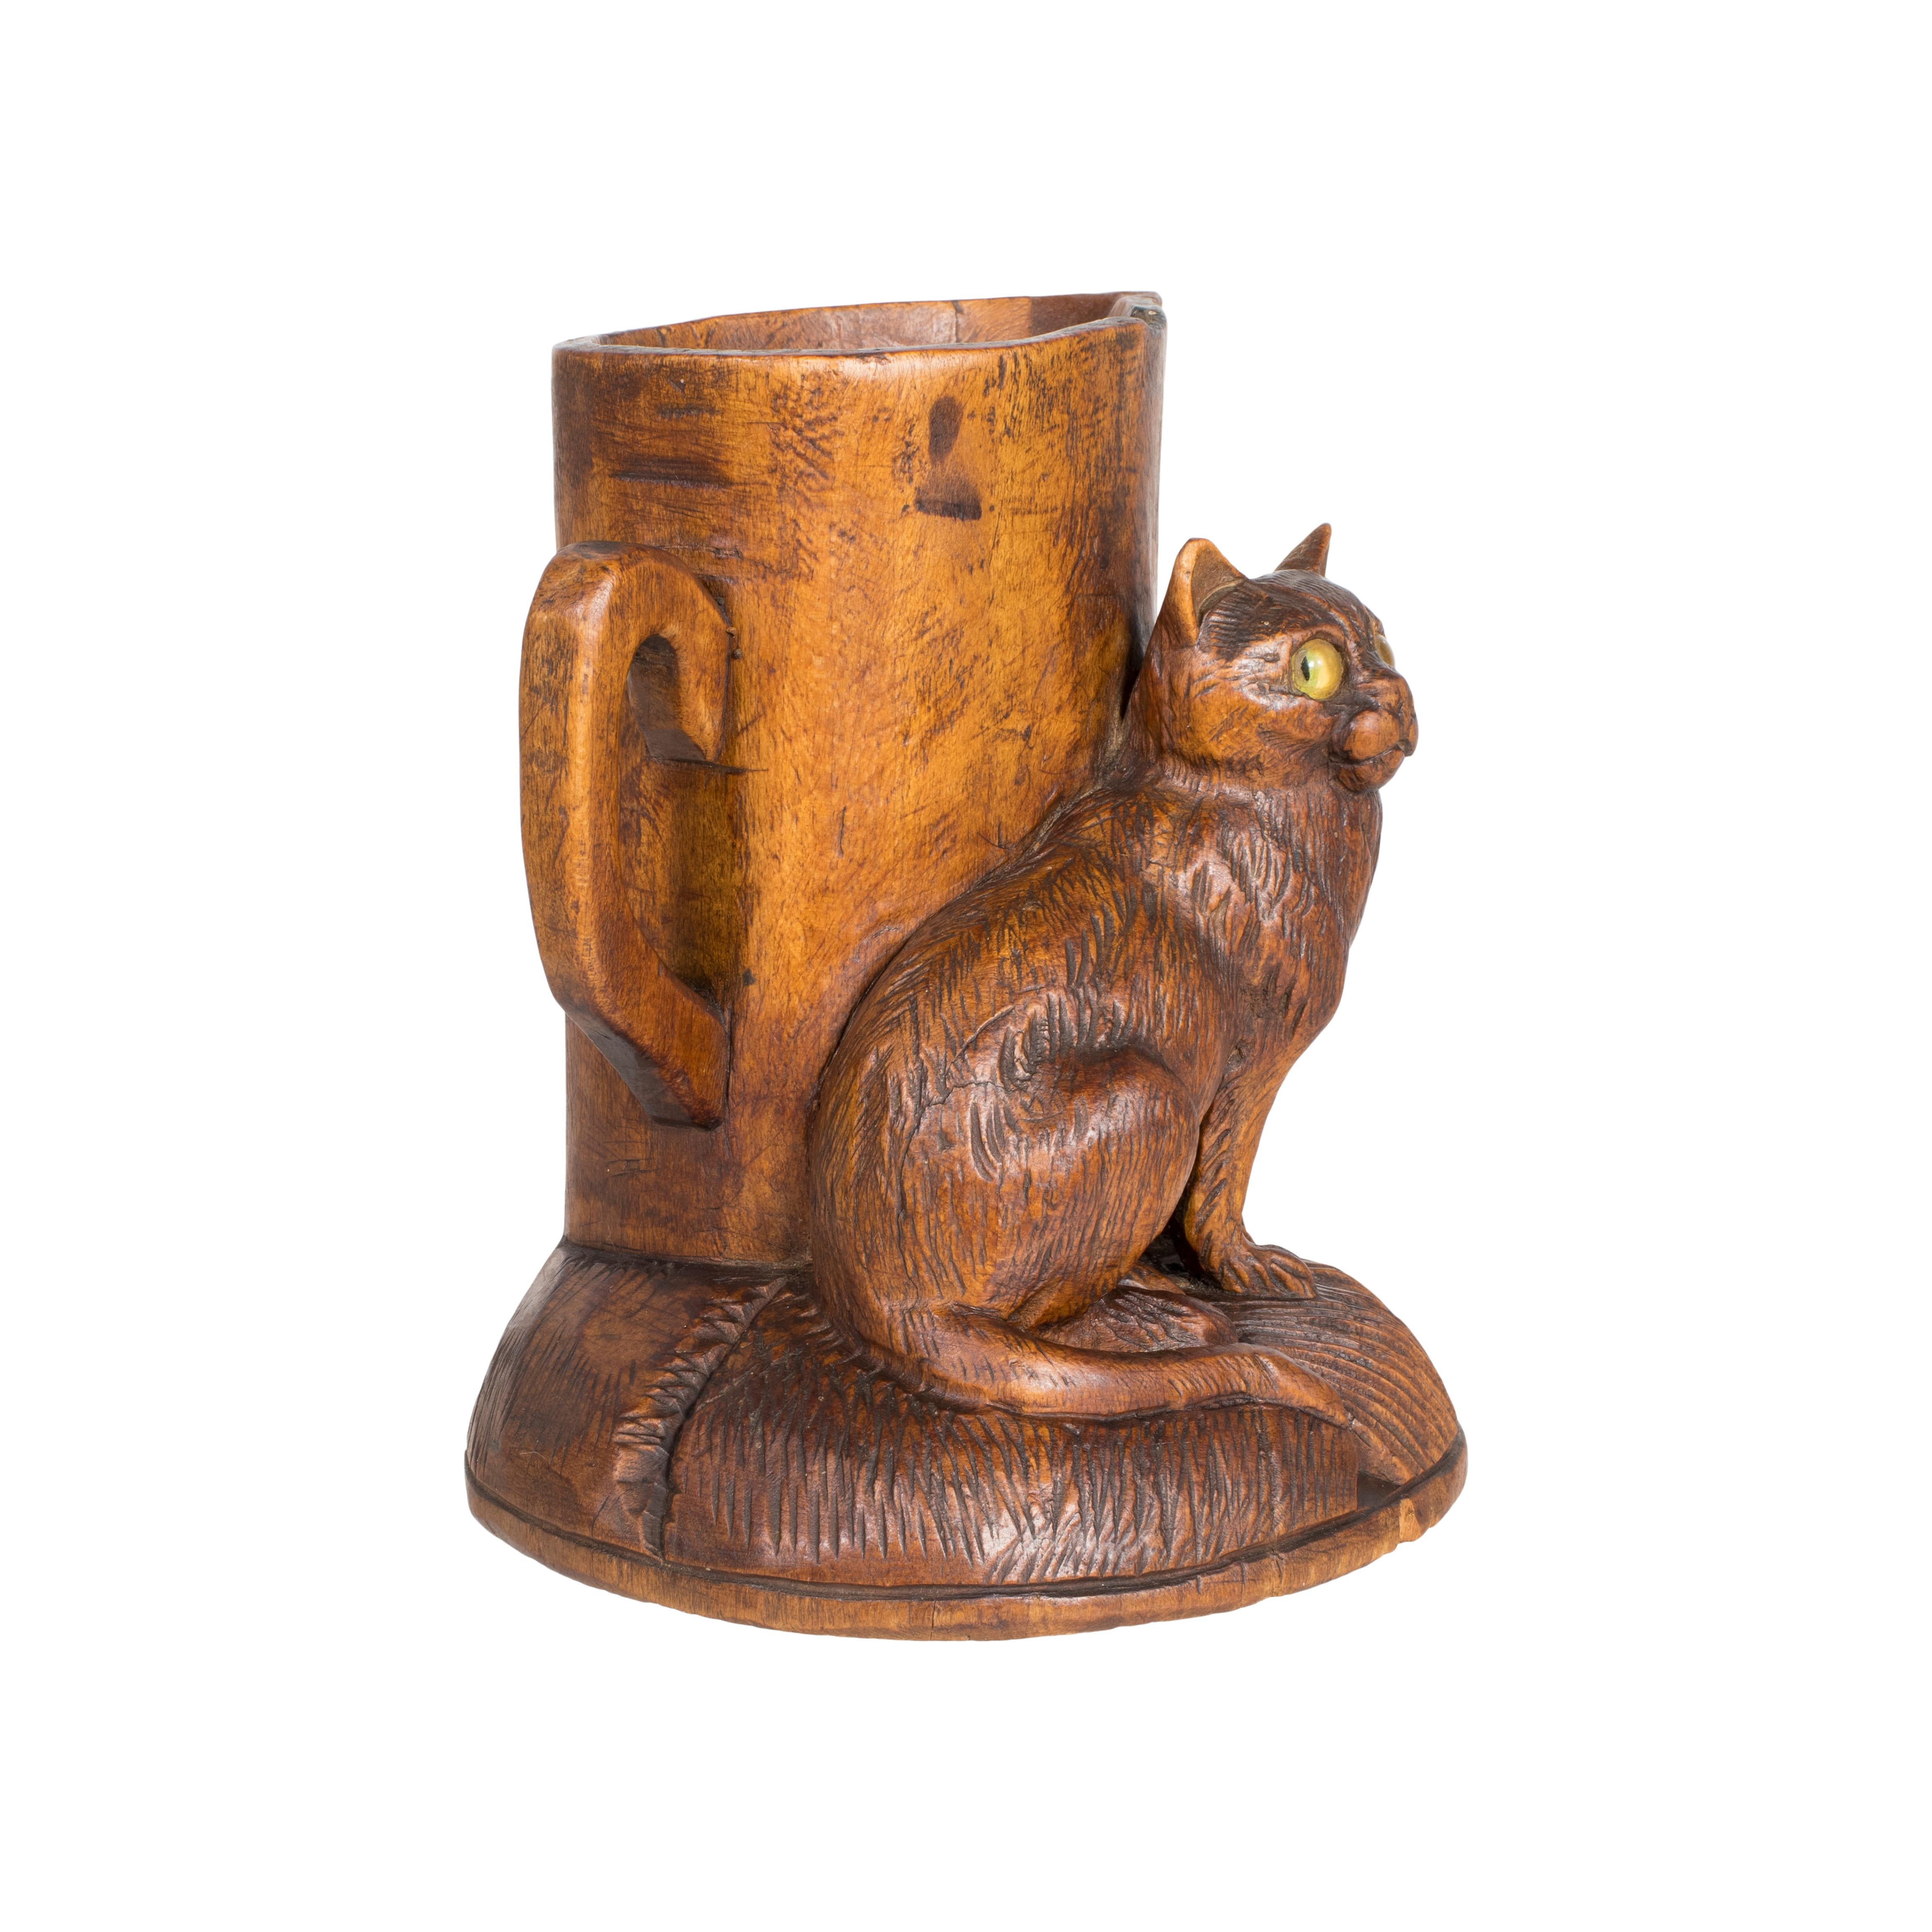 Swiss carved match holder with a cat with glass eyes seated beside a pitcher. In the 1800’s the wood carving industry of Switzerland started in the town of Brienz. By the end of the 1800’s it had become the driving force for this industry. Swiss